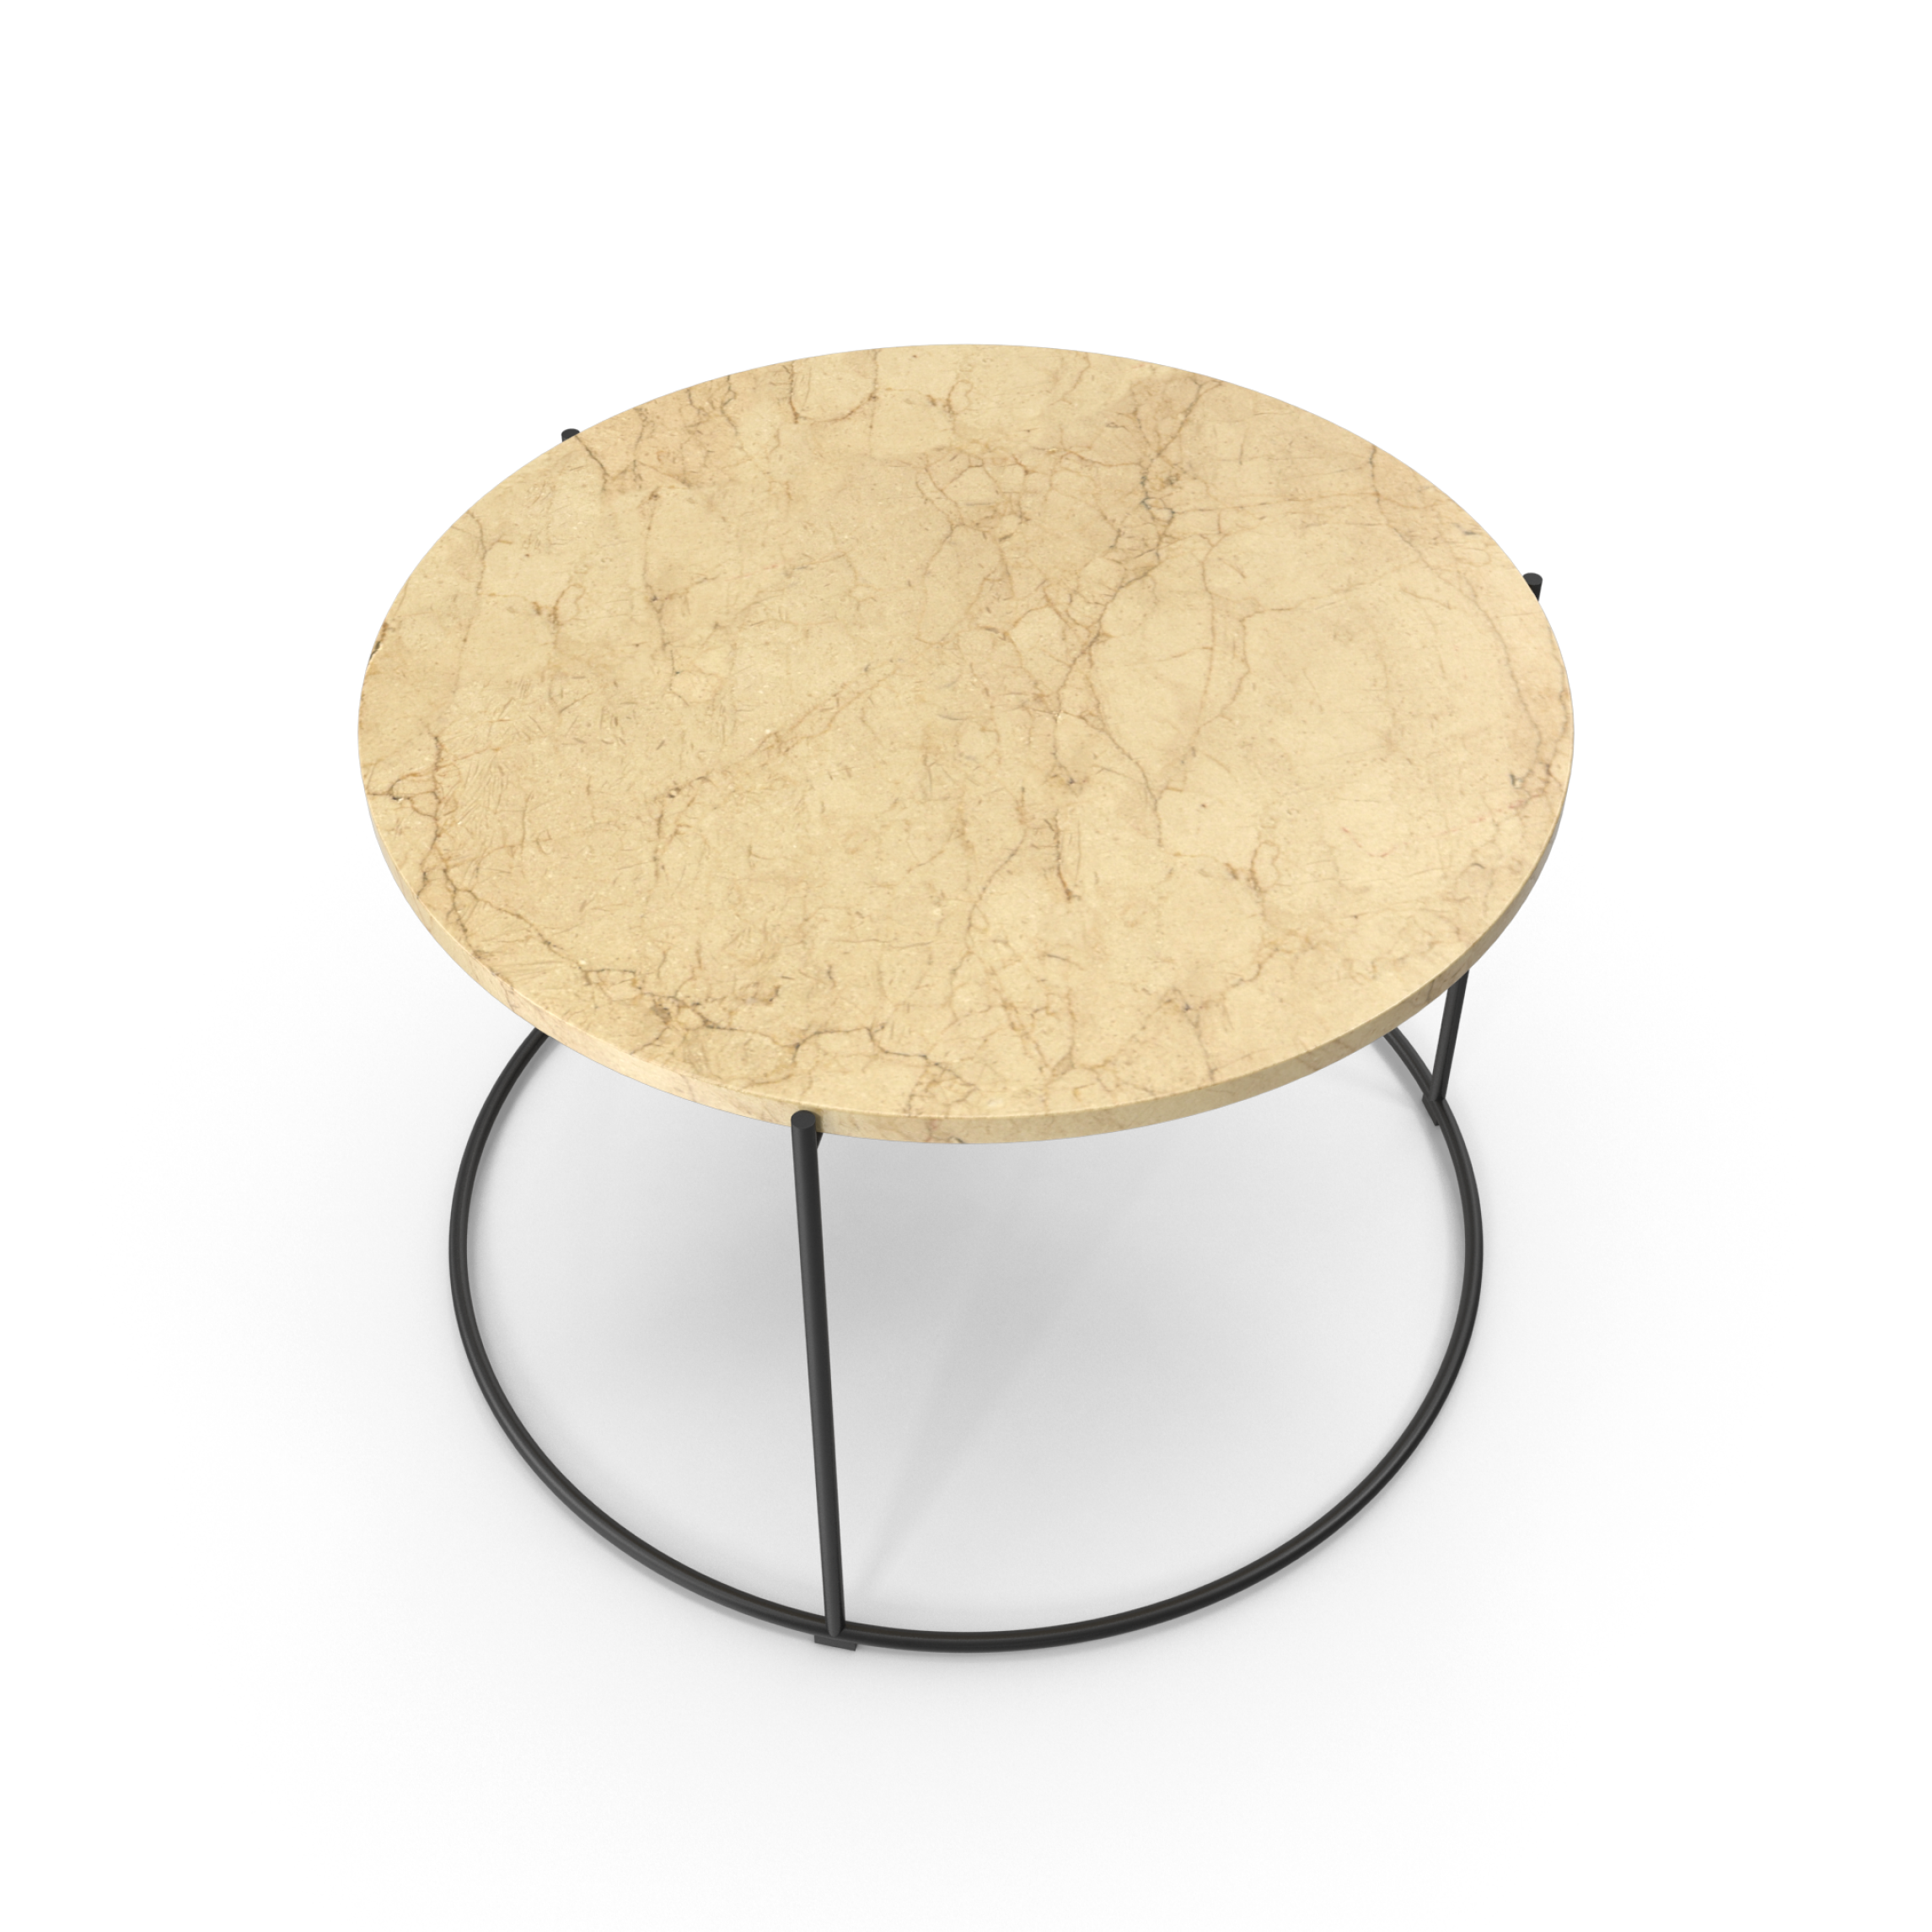 Fully rounded table